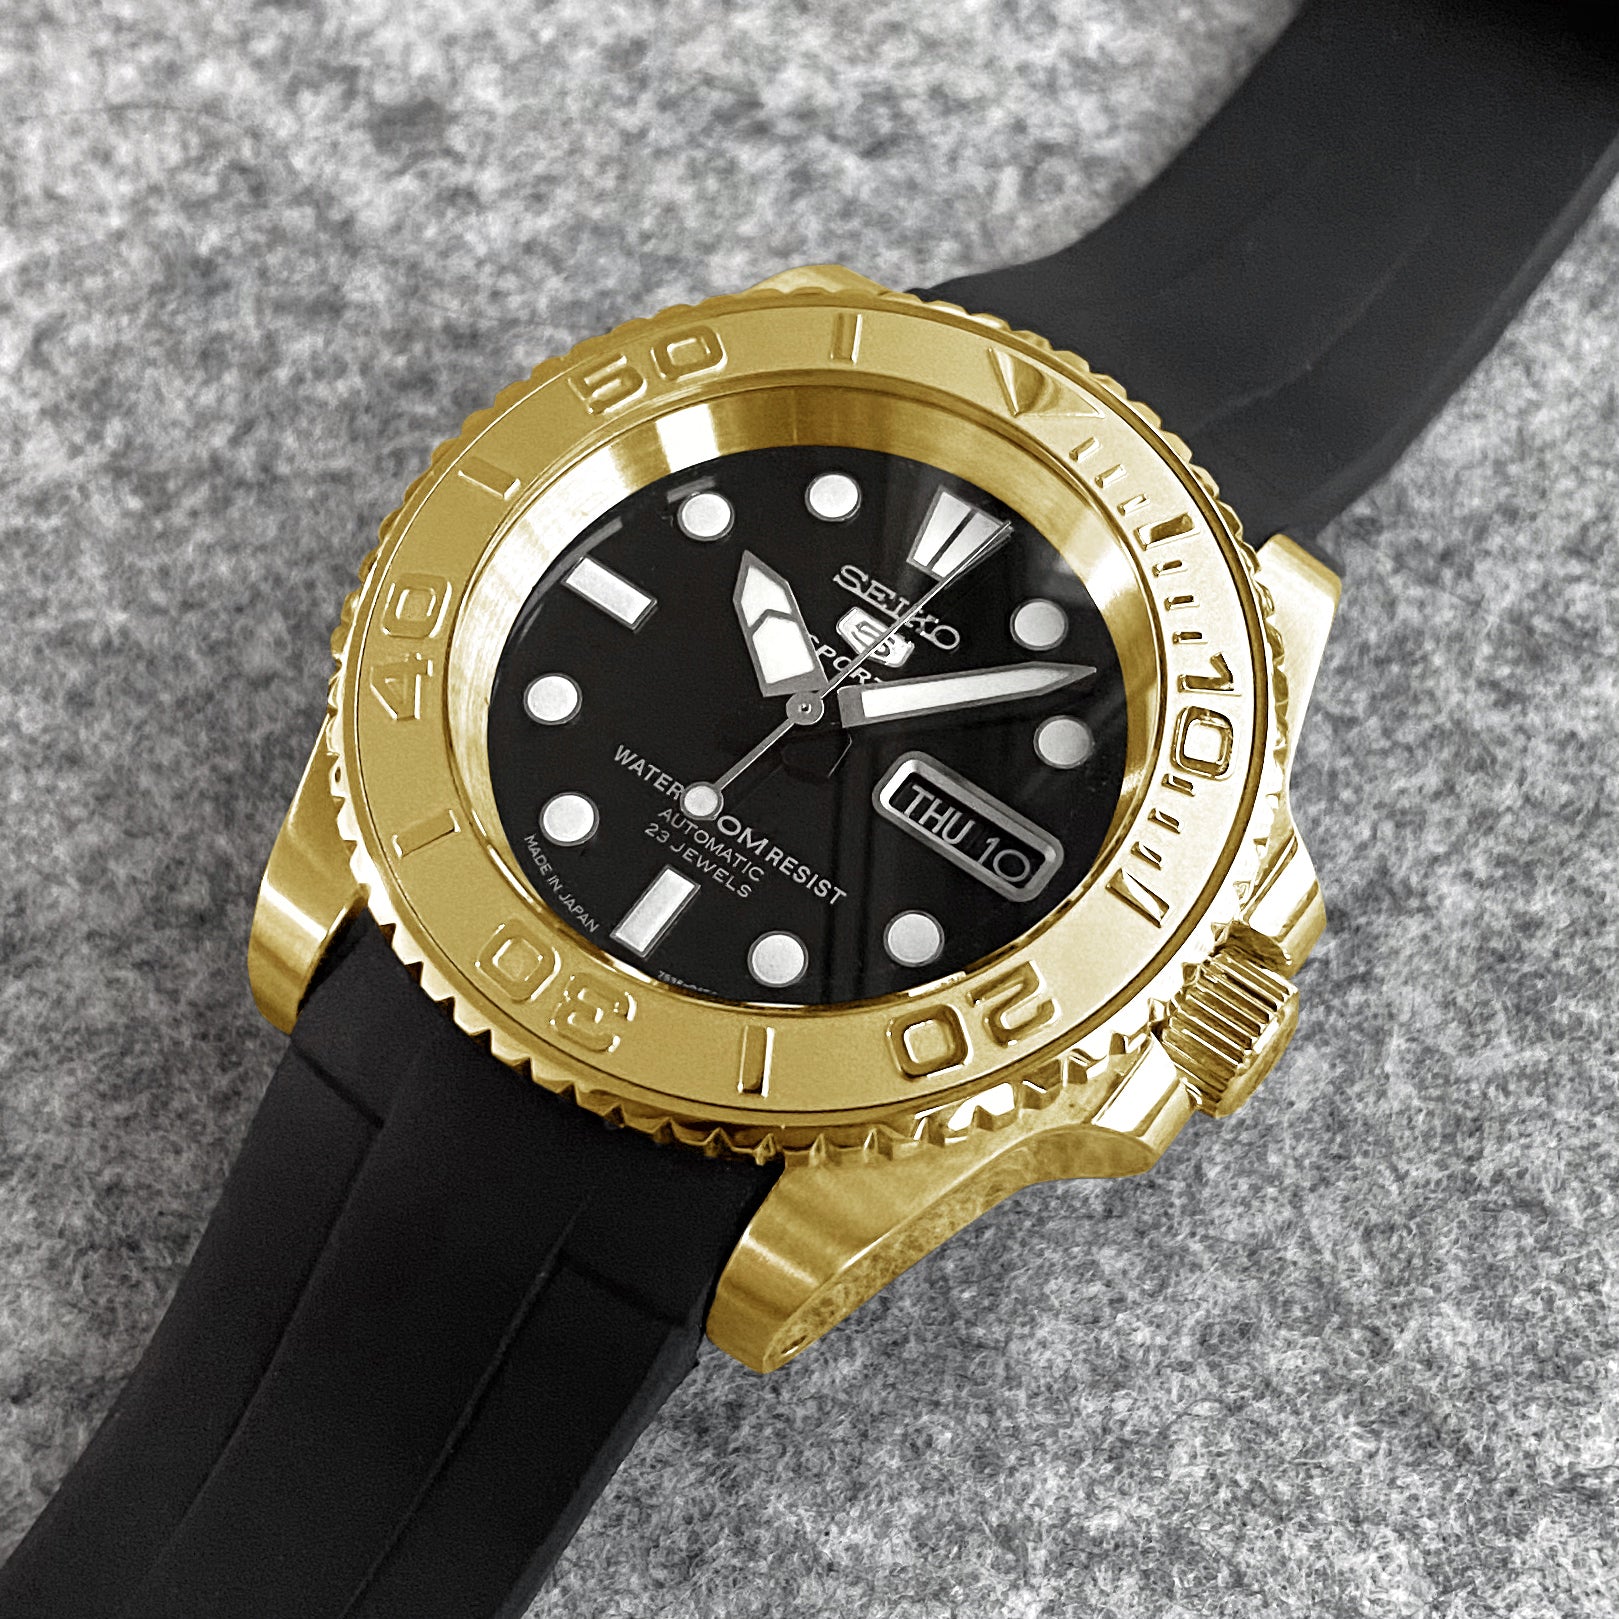 Case - SKX007 Sub - Polished PVD Gold (With Case Back) - DLW WATCHES